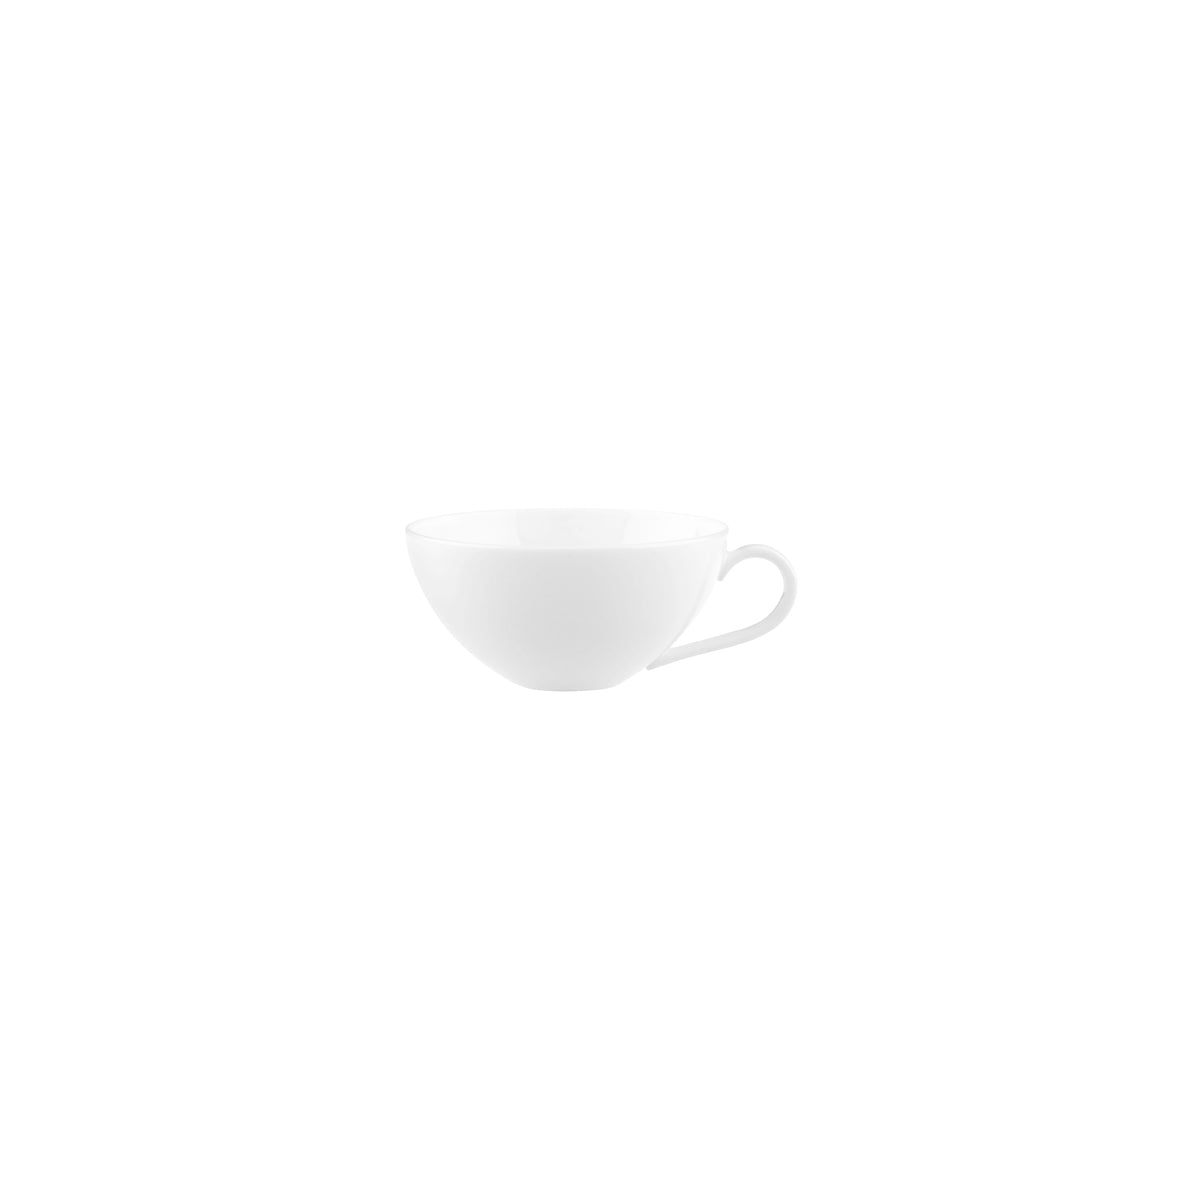 VB16-3272-1273 Villeroy And Boch Villeroy And Boch Stella Hotel White Cup 200ml Tomkin Australia Hospitality Supplies